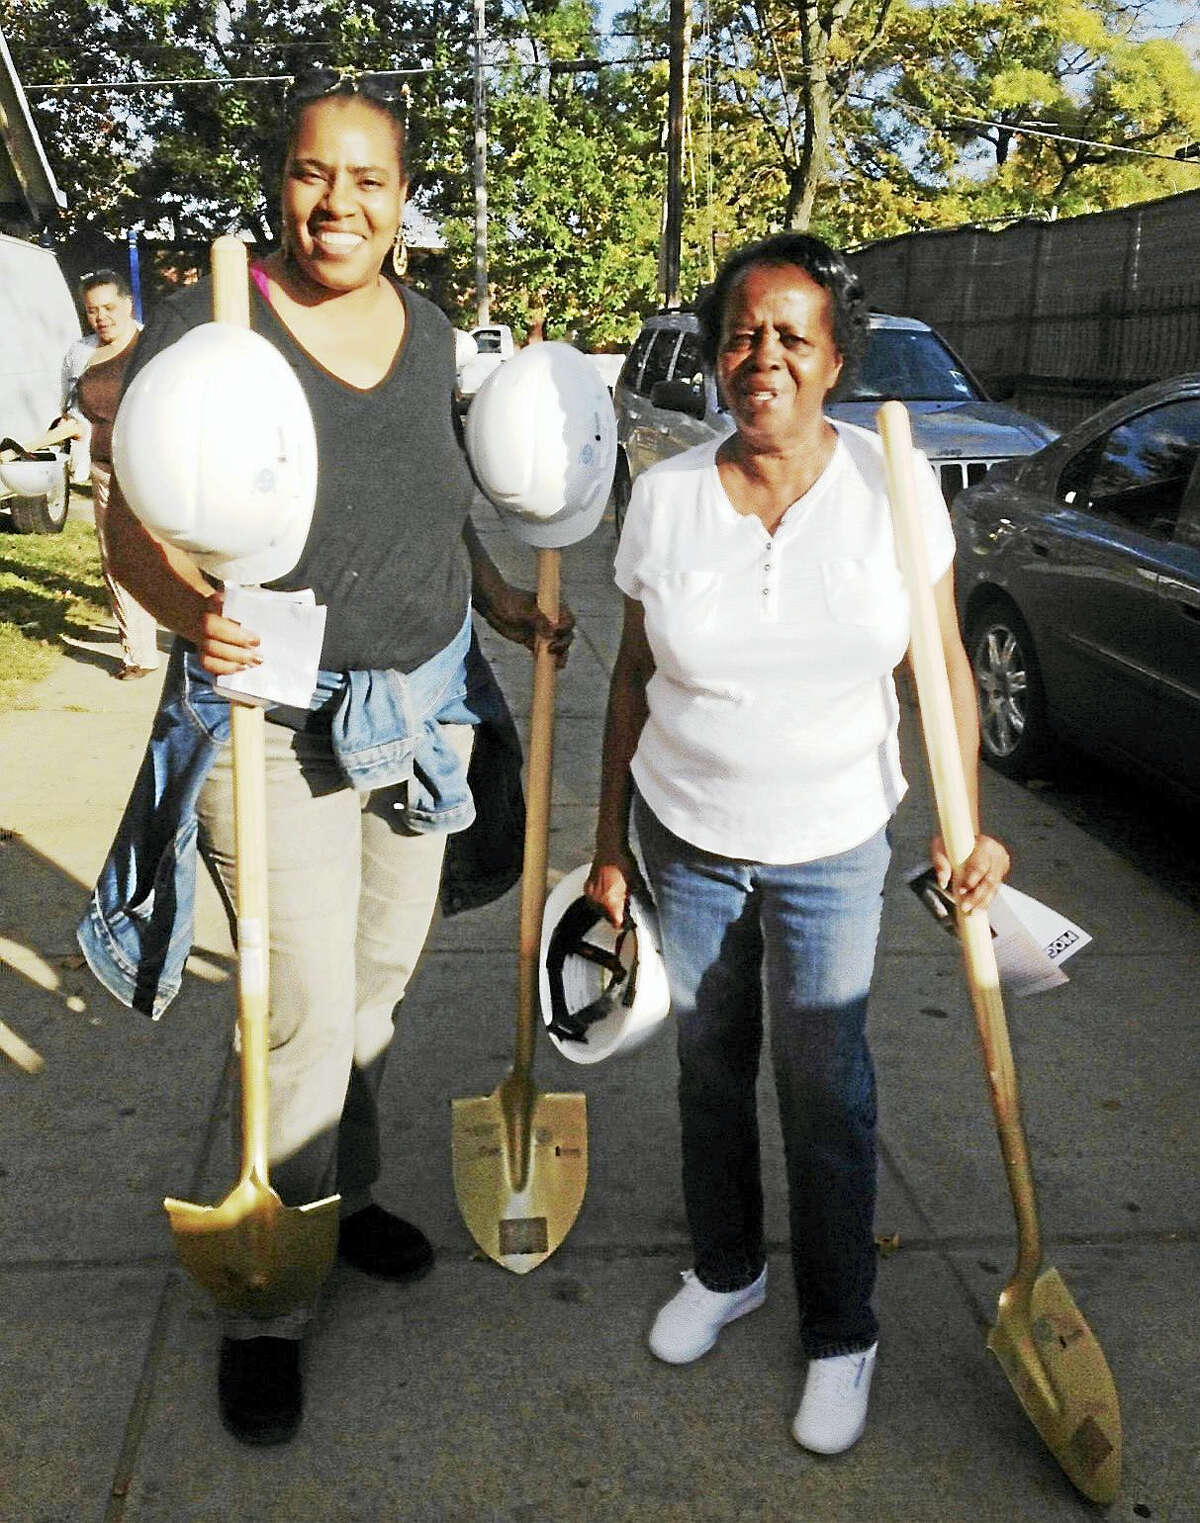 Farnam Courts residents, Sheratter Todd, left, who has lived there for 46 years, and Nezzie Ranson, who has lived there for 52 years.